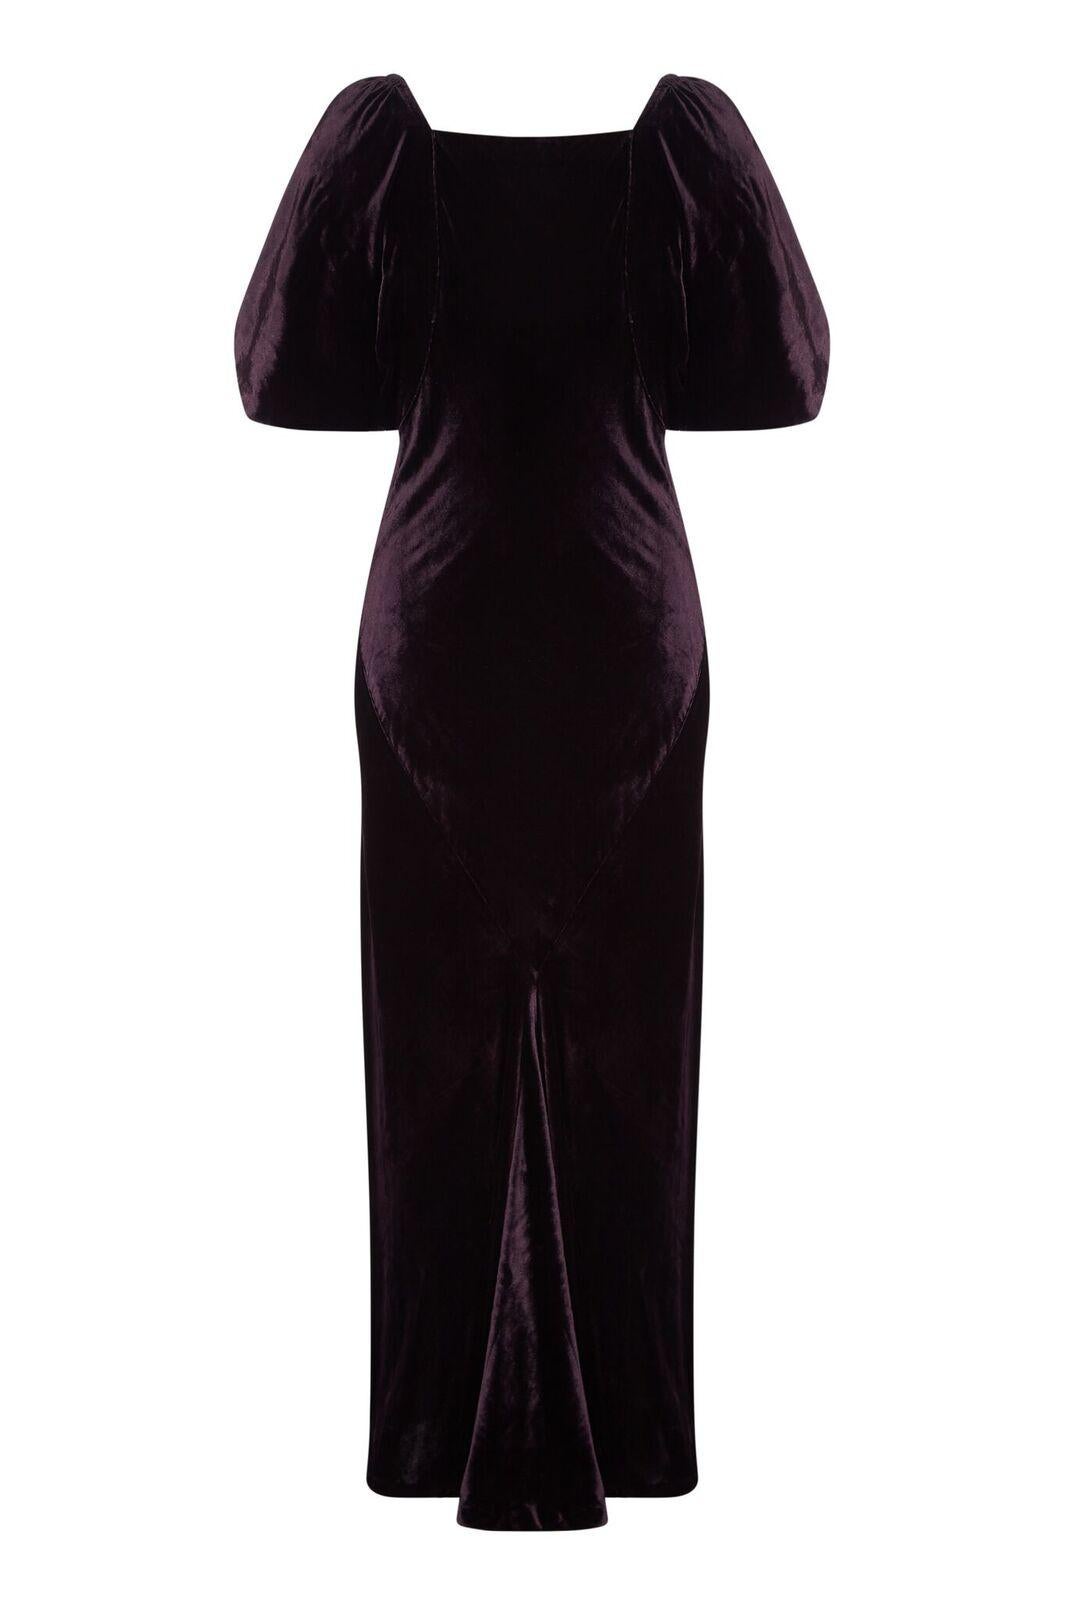 This enchanting 1930s deep purple velvet evening gown is in superb condition and exudes the glamour of the era. The rich velvet fabric is a deep aubergine shade and is skilfully cut on the bias to flatter an hourglass figure, drawing in snugly at